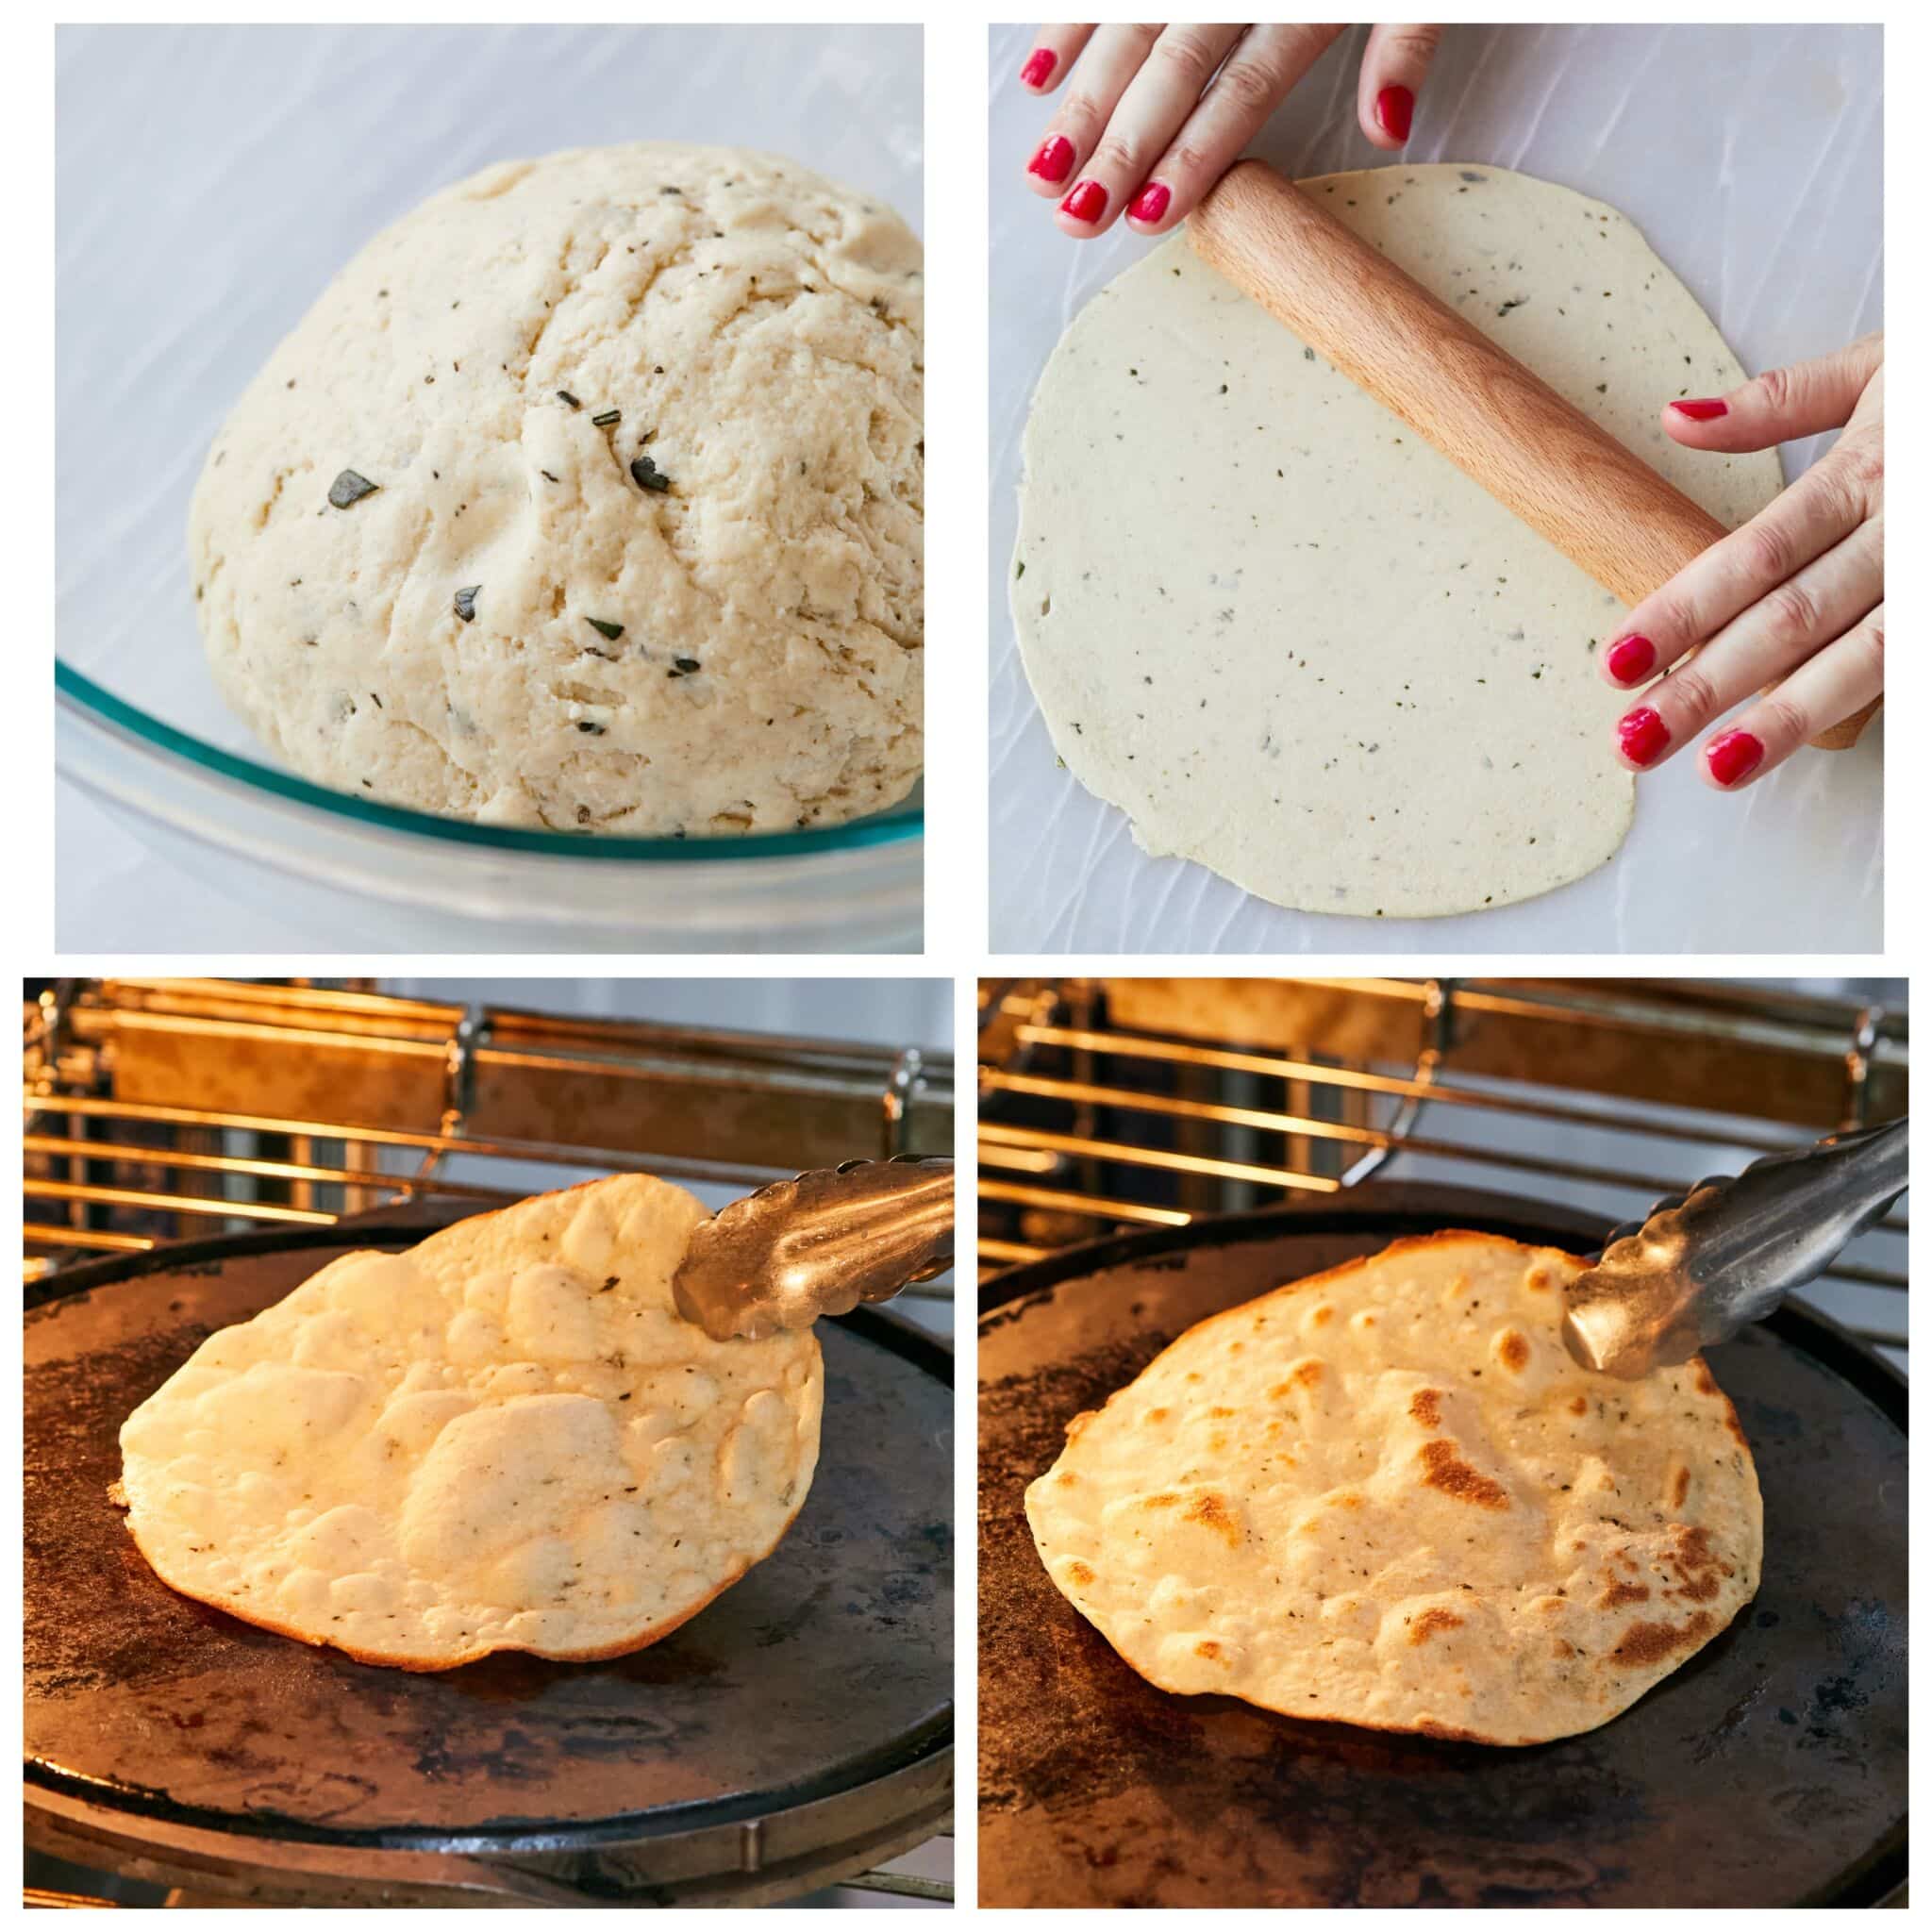 Step-by step instructions on how to make Carta di Musica: mix wet and dry ingredients separately then combine the two and knead until you get a smooth ball. Divide and roll the dough out using a rolling pin. Bake one at a time on a preheated stone or tray until golden brown and bubbly. 